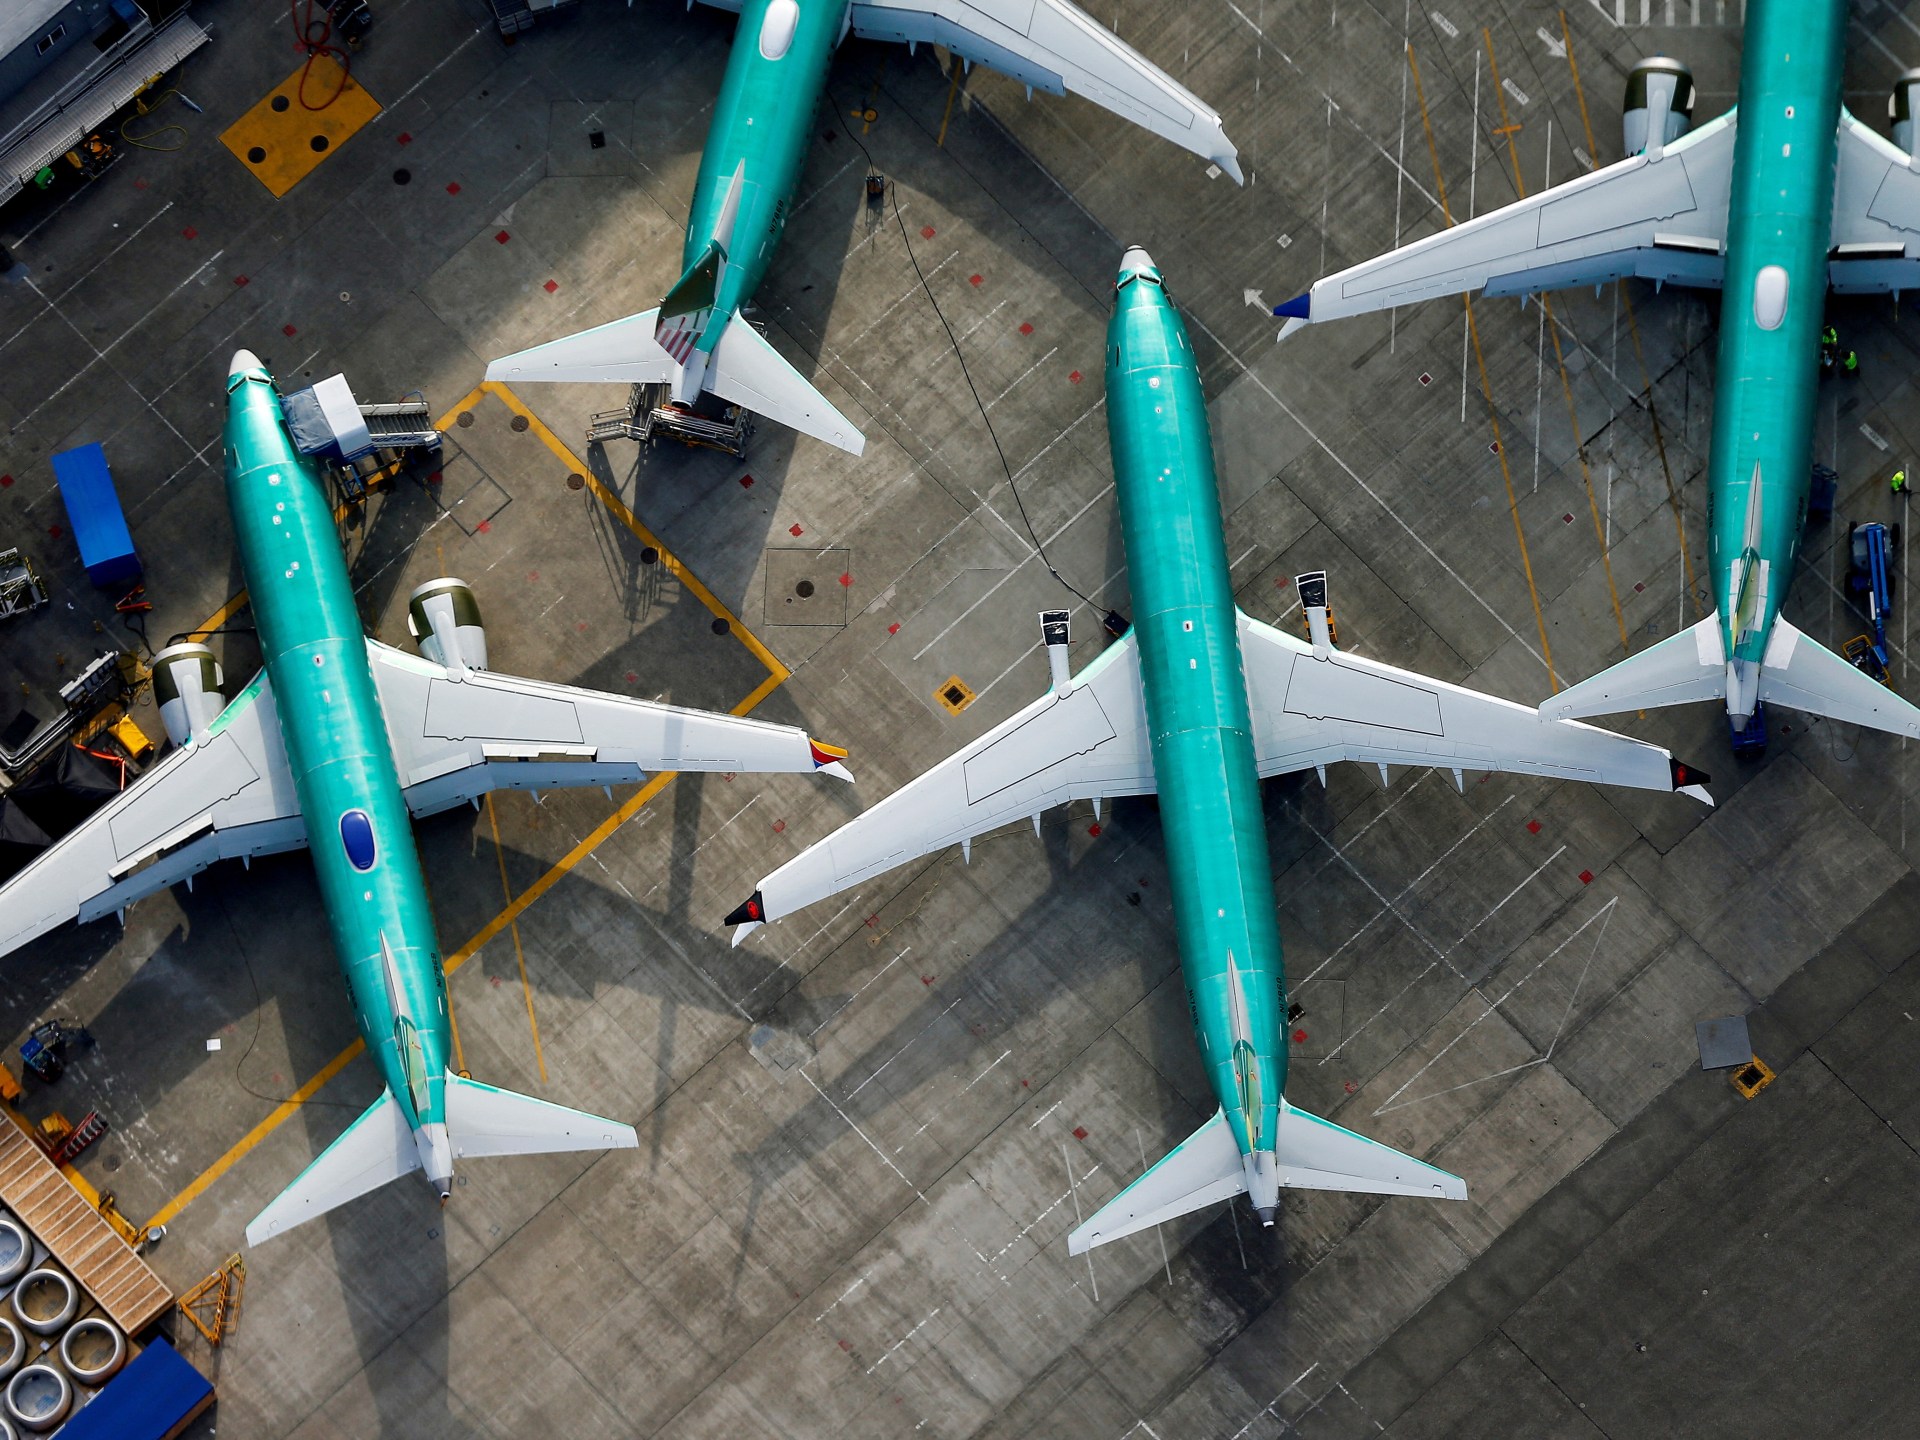 Head of Boeing 737 MAX programme out amid security considerations at planemaker | Aviation Information